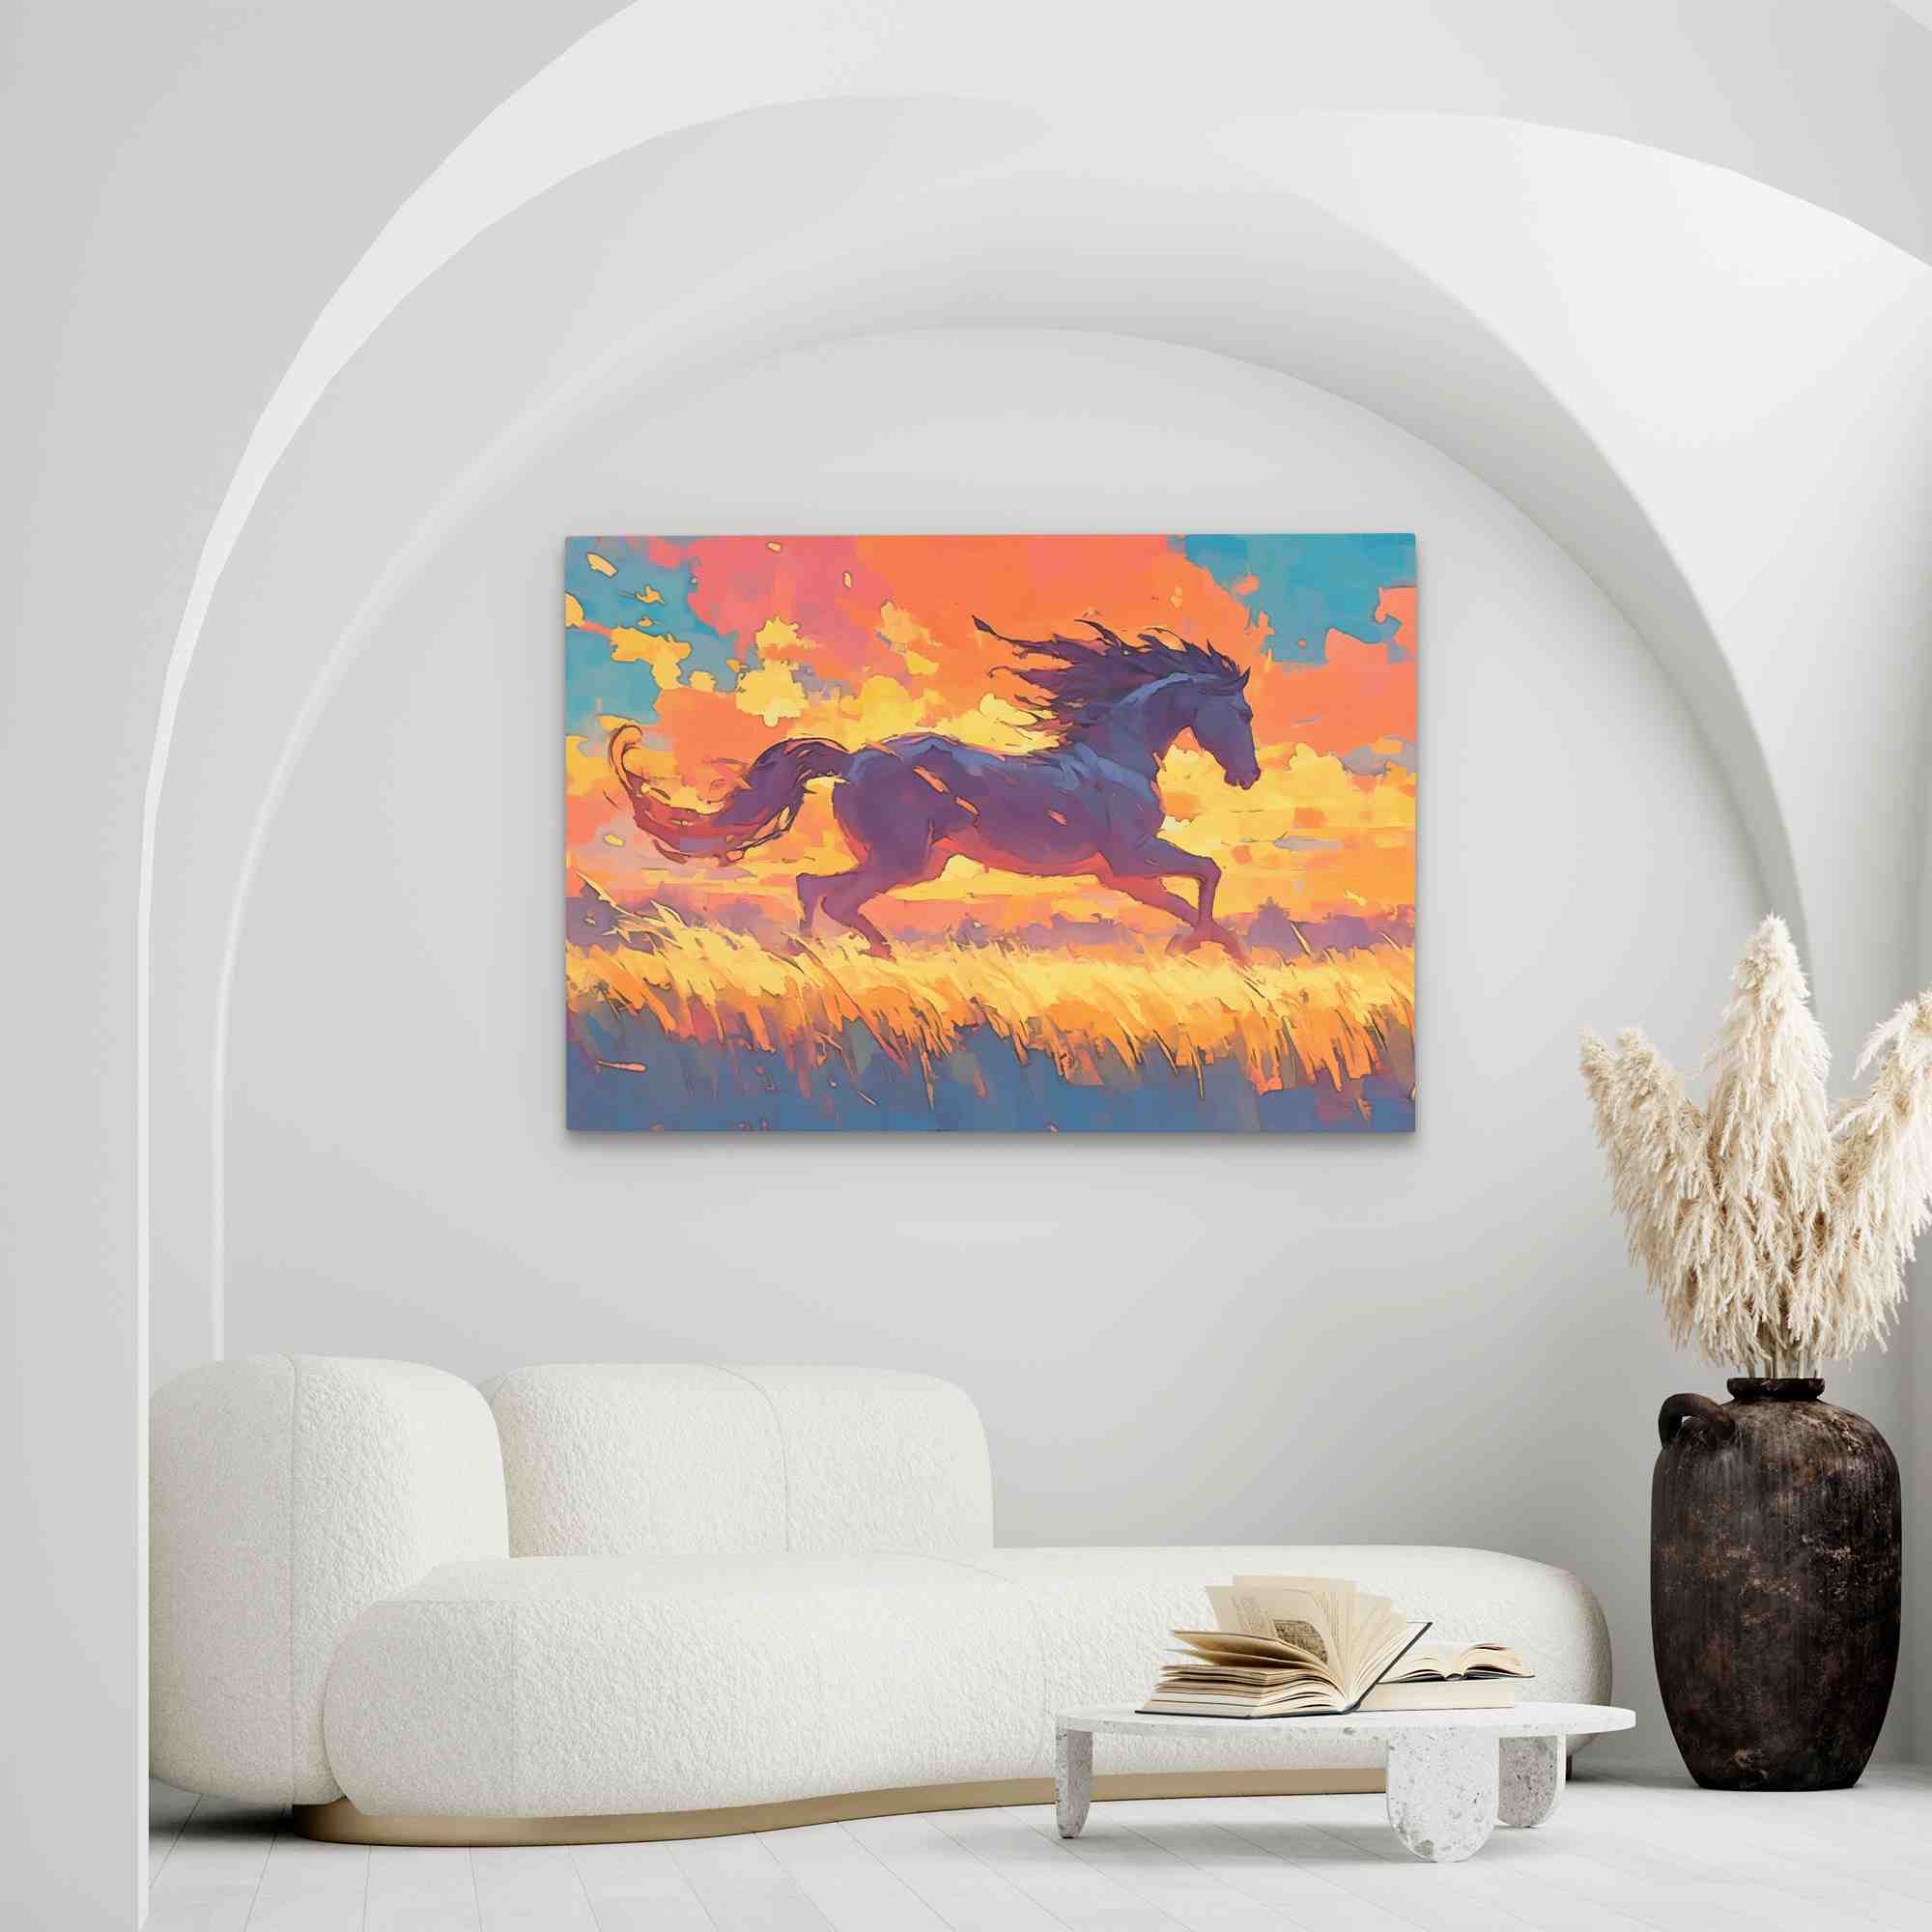 a painting of a horse running through a field